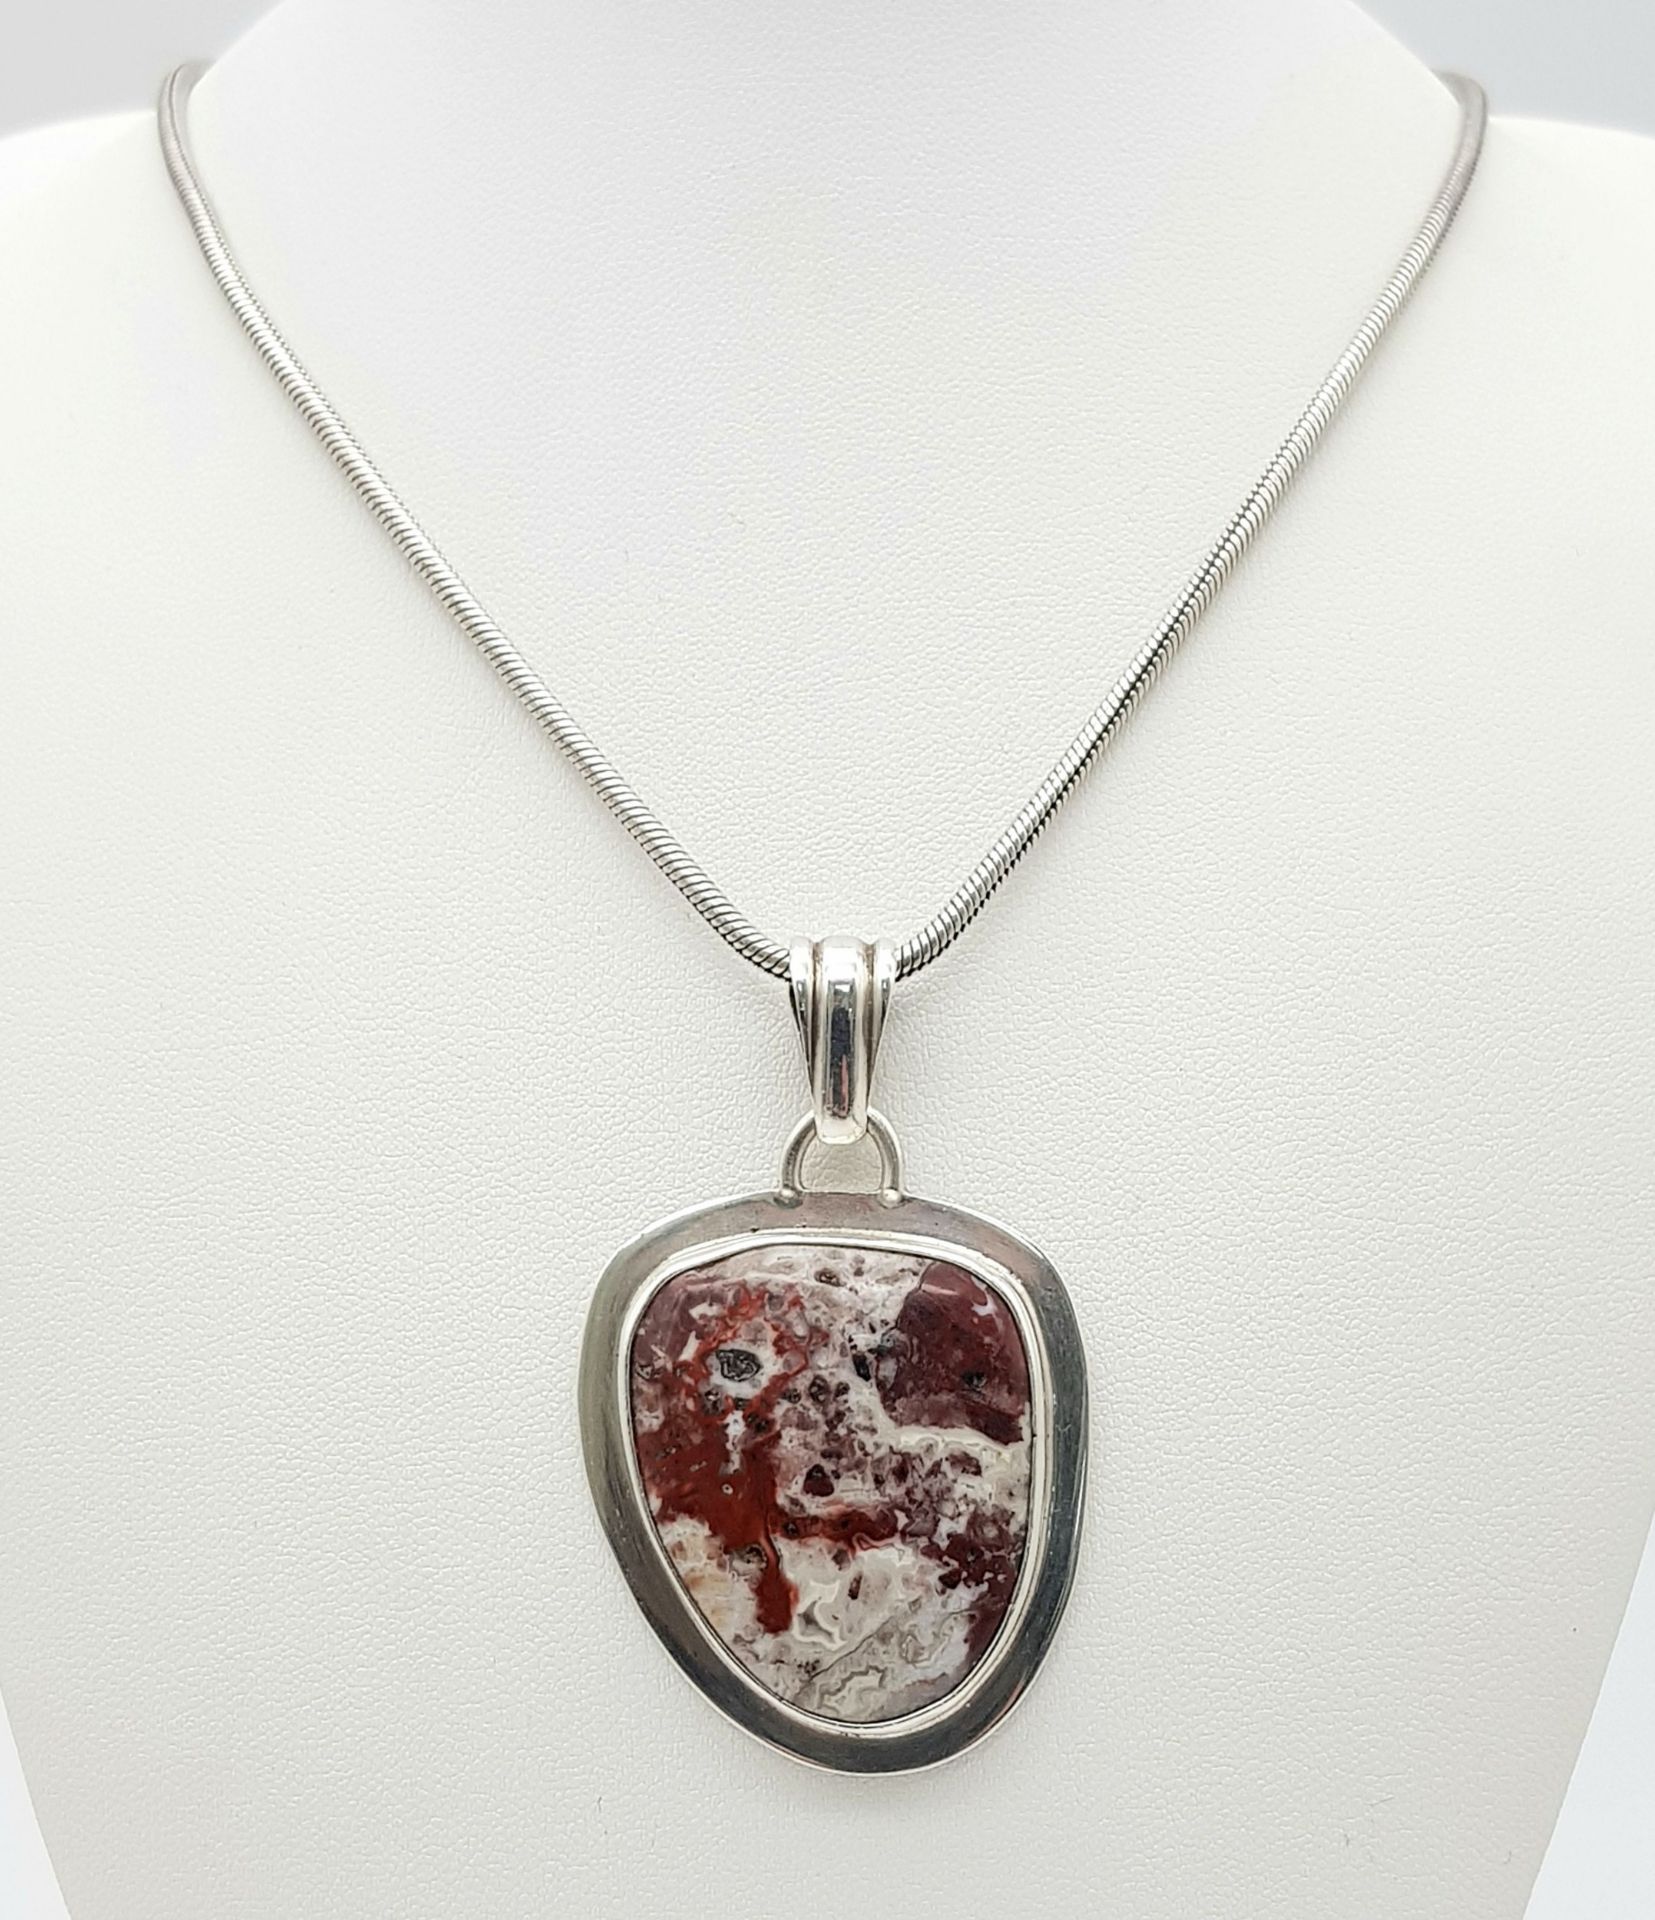 A 925 Silver and Agate Pendant on a 925 Silver Necklace. 35g total weight. 6cm pendant. 42cm